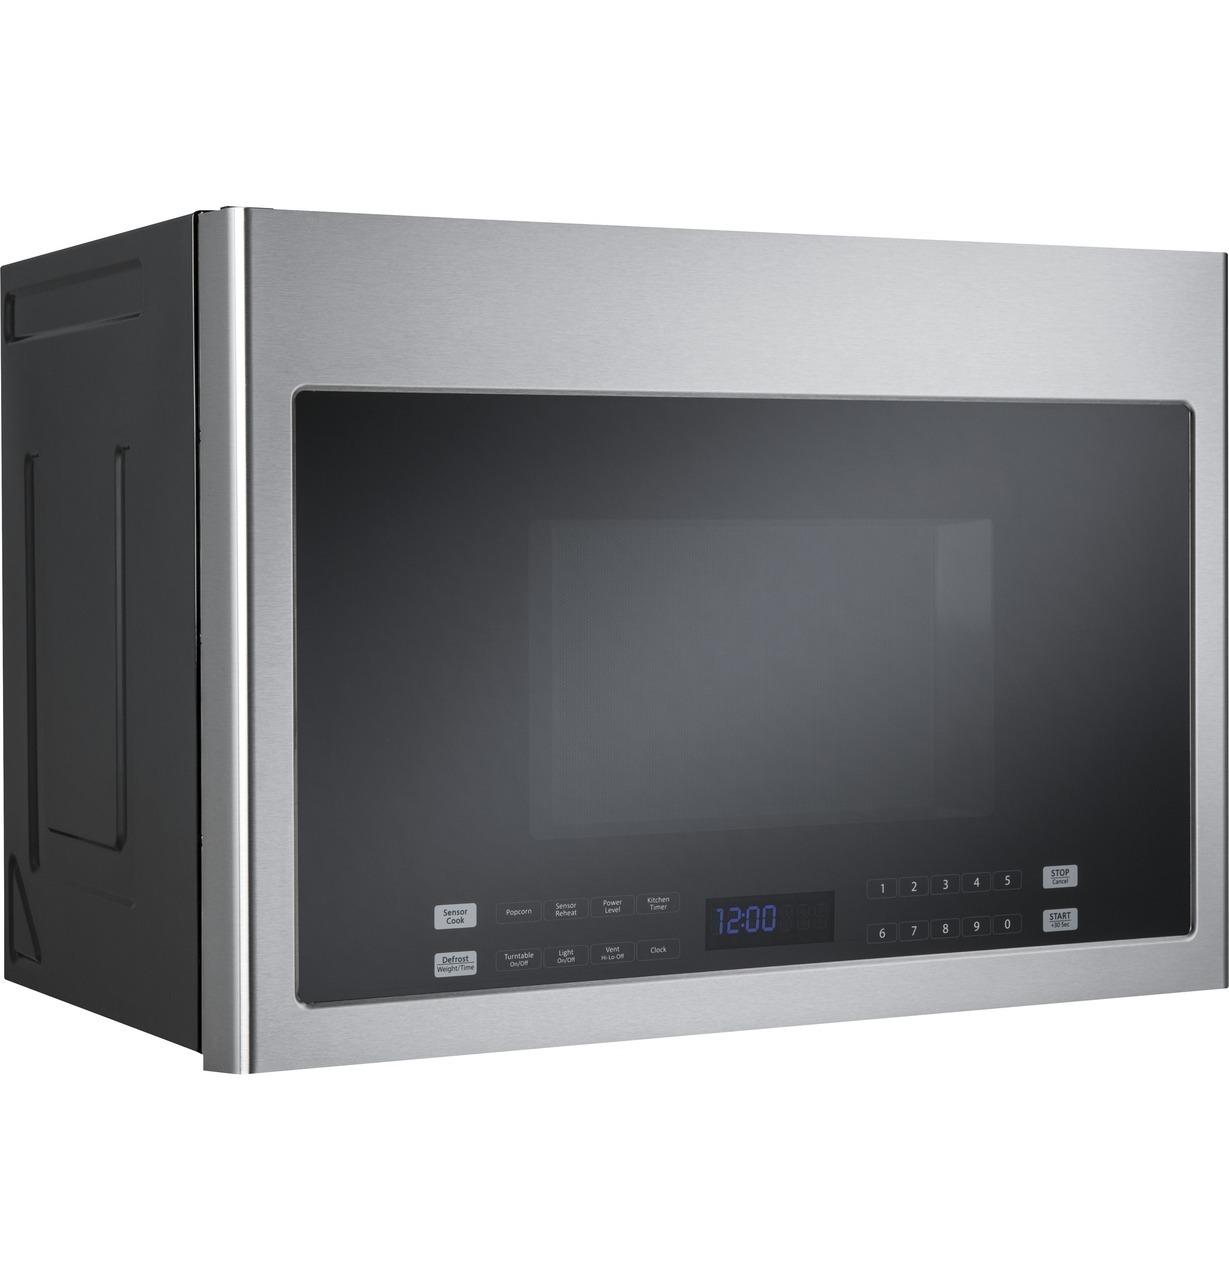 Haier 24" 1.4 Cu. Ft. Over-The-Range Microwave Oven